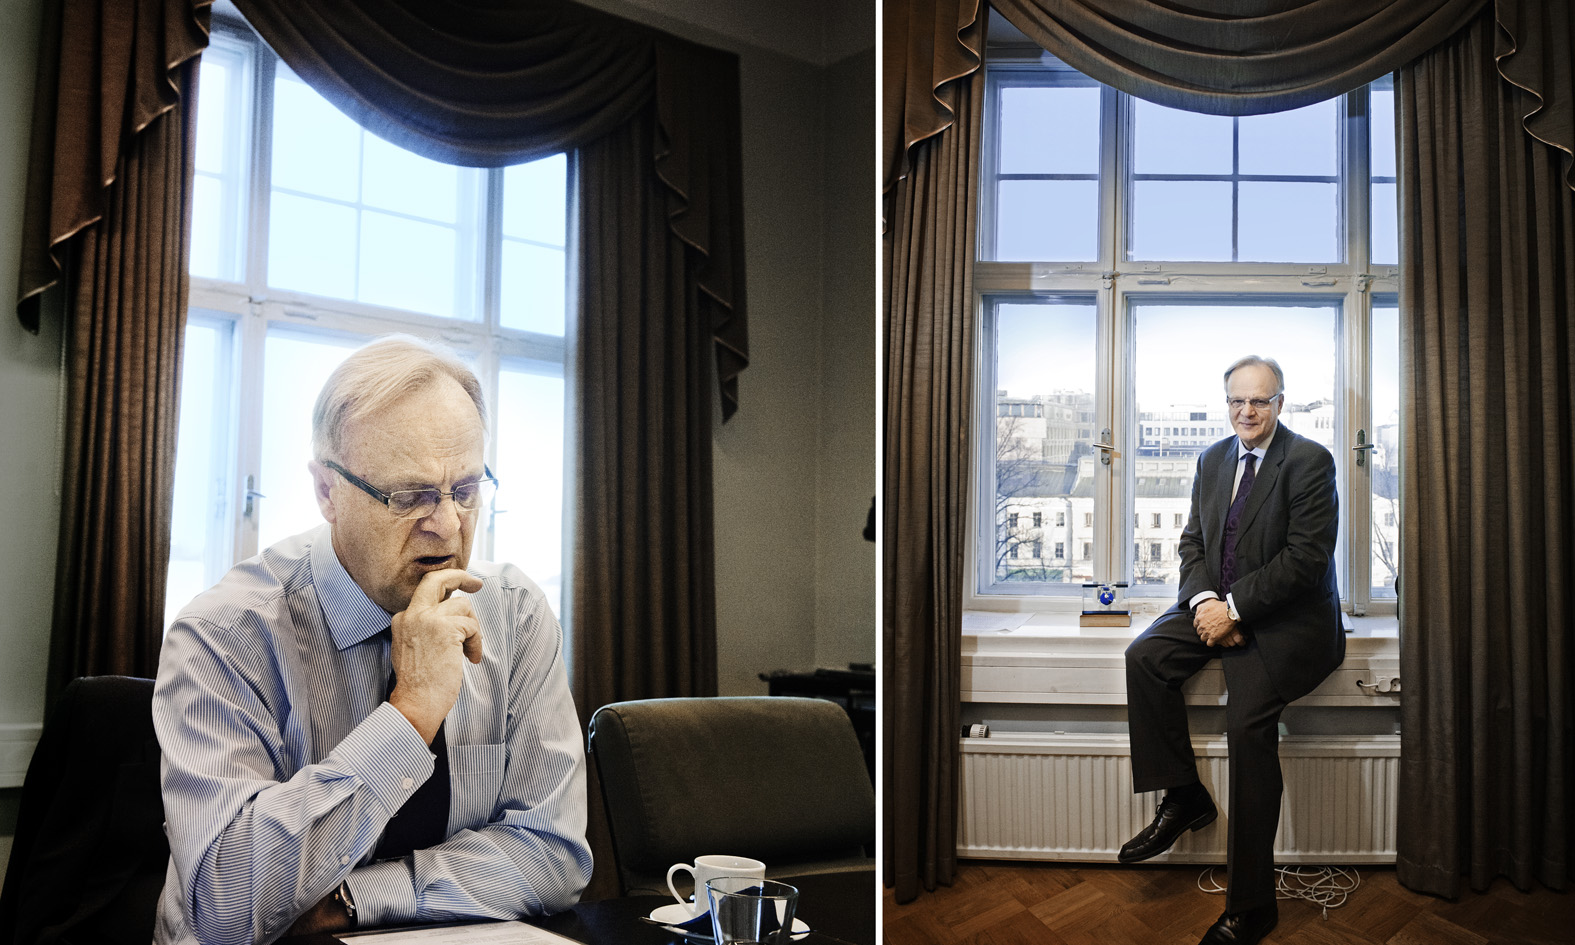 Minister of Labour Lauri Ihalainen: Improved competence will safeguard Finland’s future 